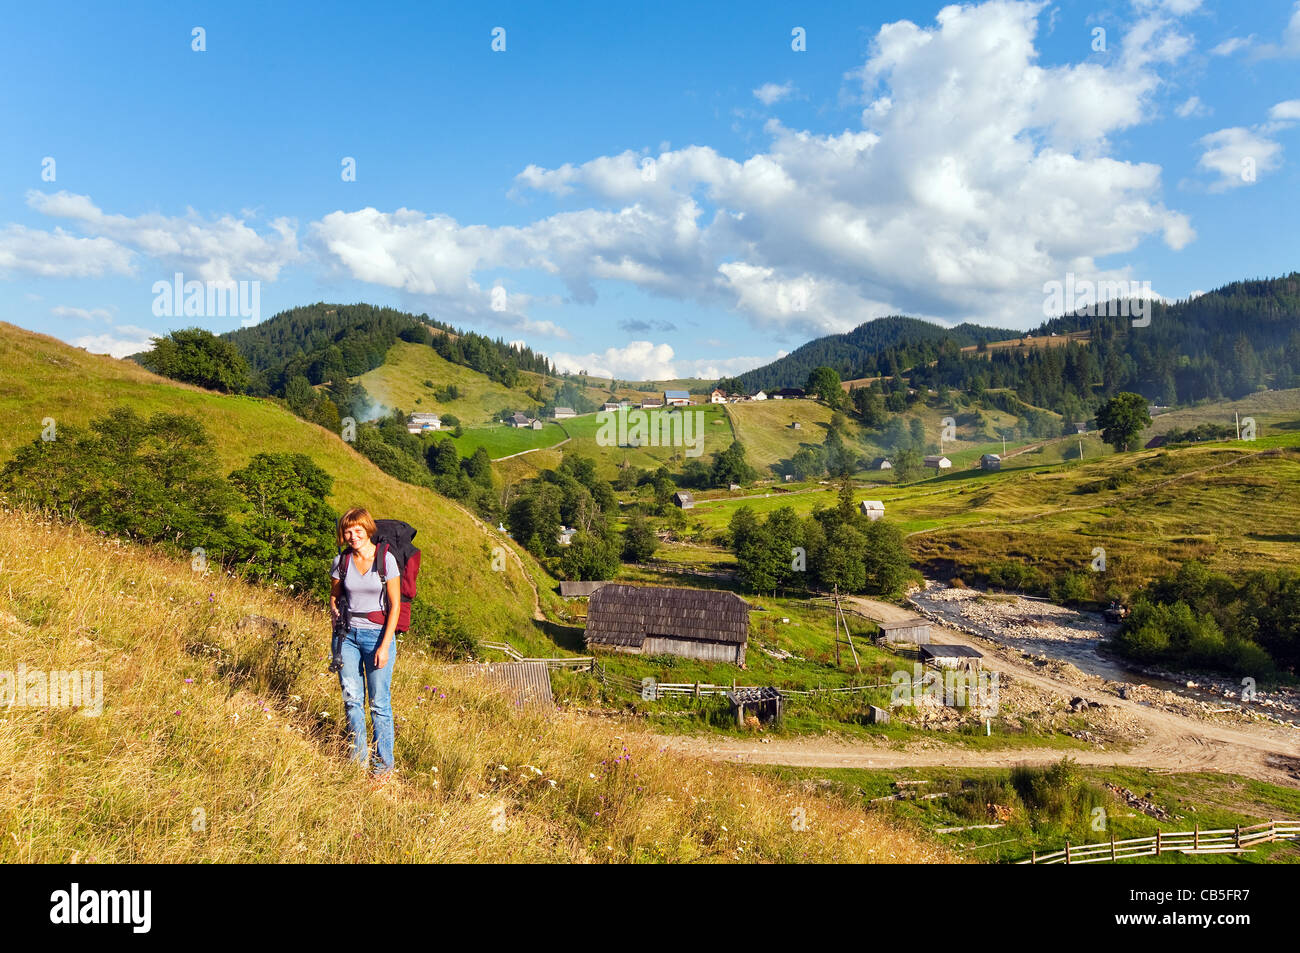 Summer mountain village landscape and woman - tourist in front Stock Photo